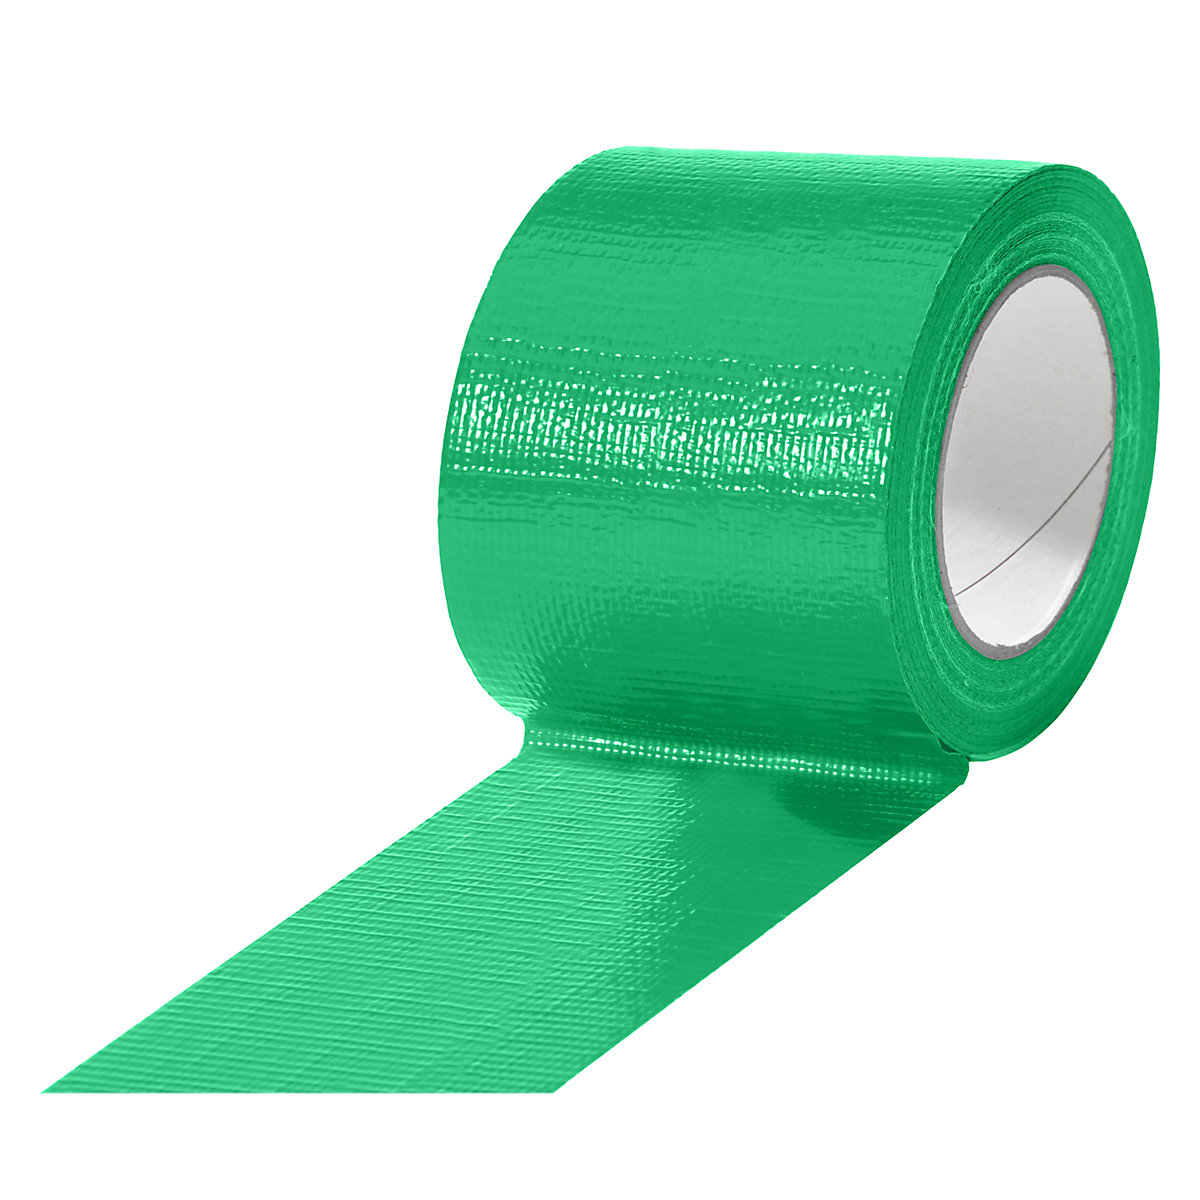 Fabric tape, in different colours, pack of 12 rolls, green, tape width 75 mm-16